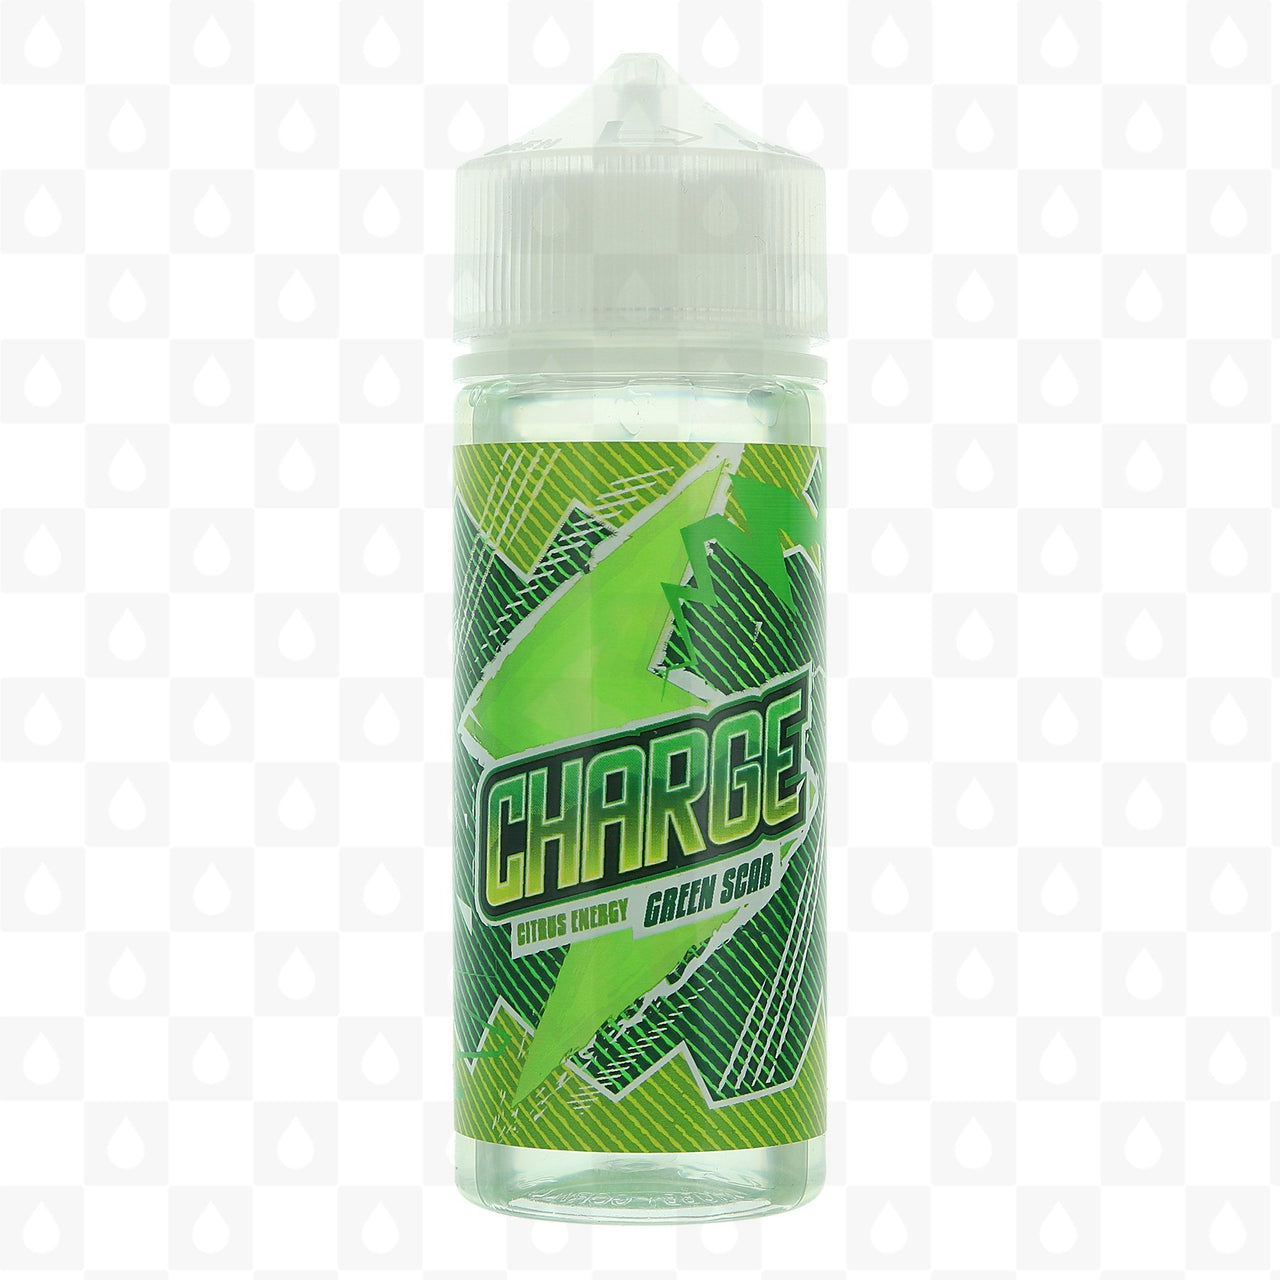 Green Scar | Citrus Energy by Charge E Liquid | 100ml Short Fill